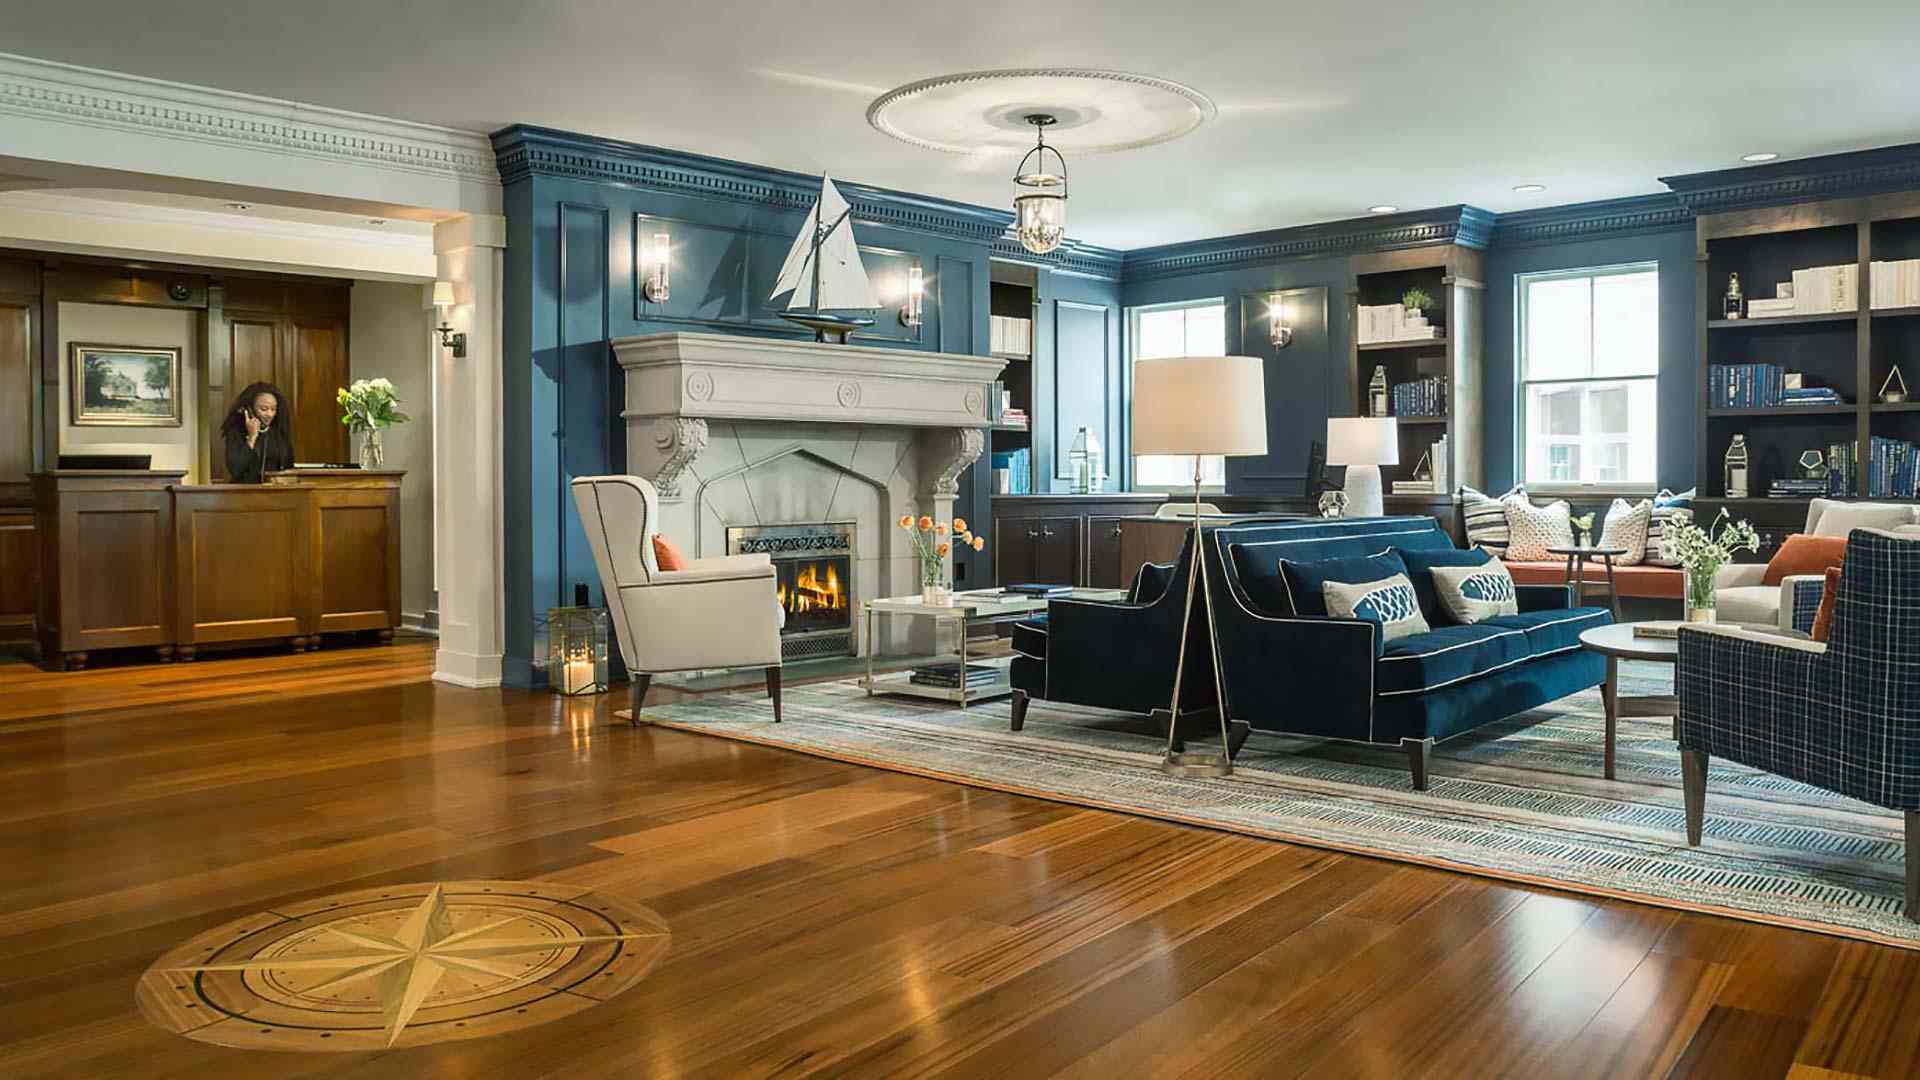 New England Hotels with Jacuzzi and Fireplace In Room Awesome the 9 Best Portland Maine Hotels Of 2019